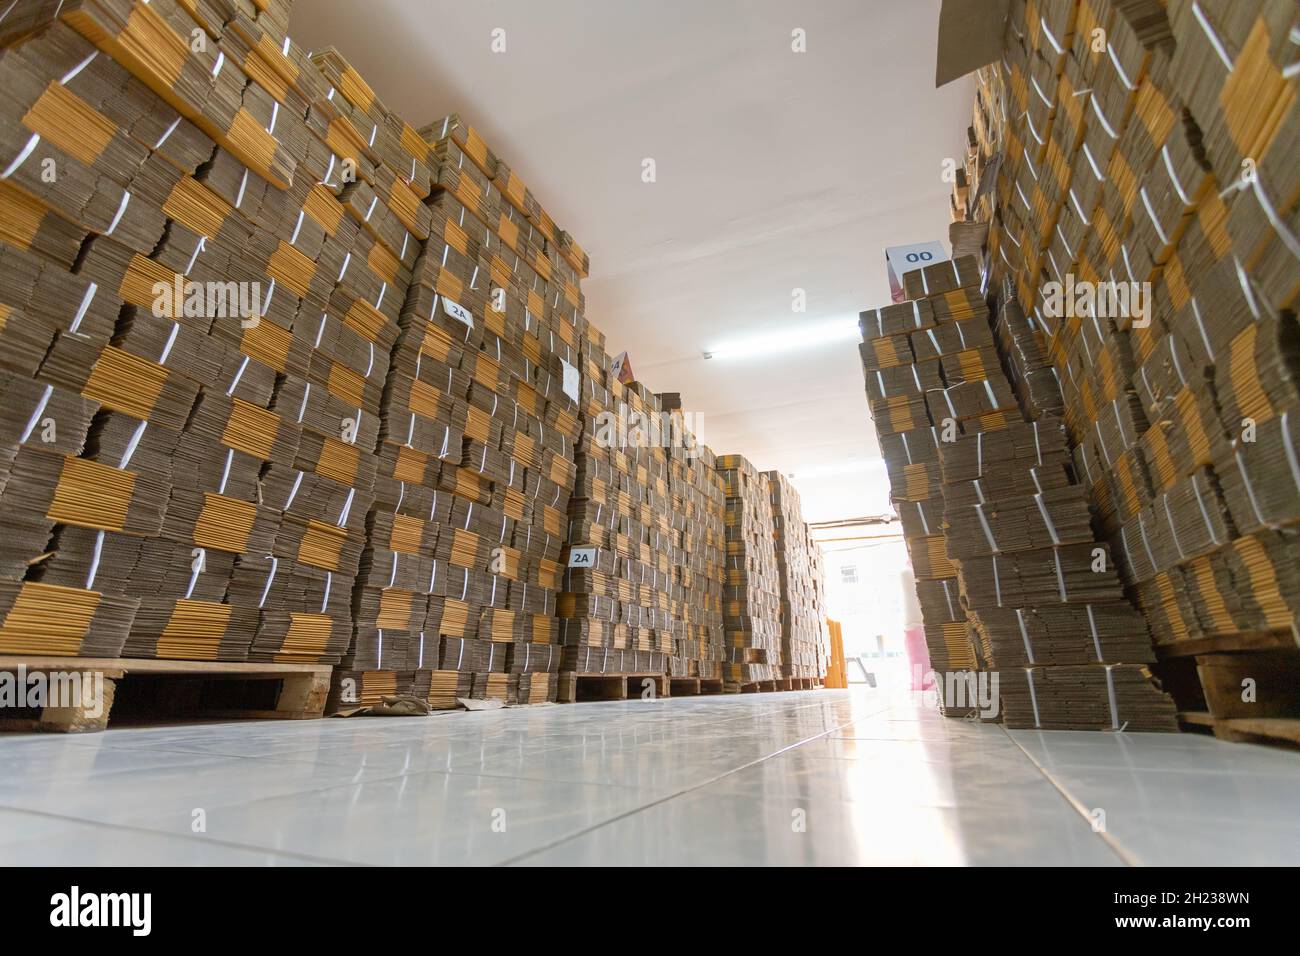 Row of brown boxes, rack stack arrangement of cardboard boxes in a store warehouse. Stock Photo